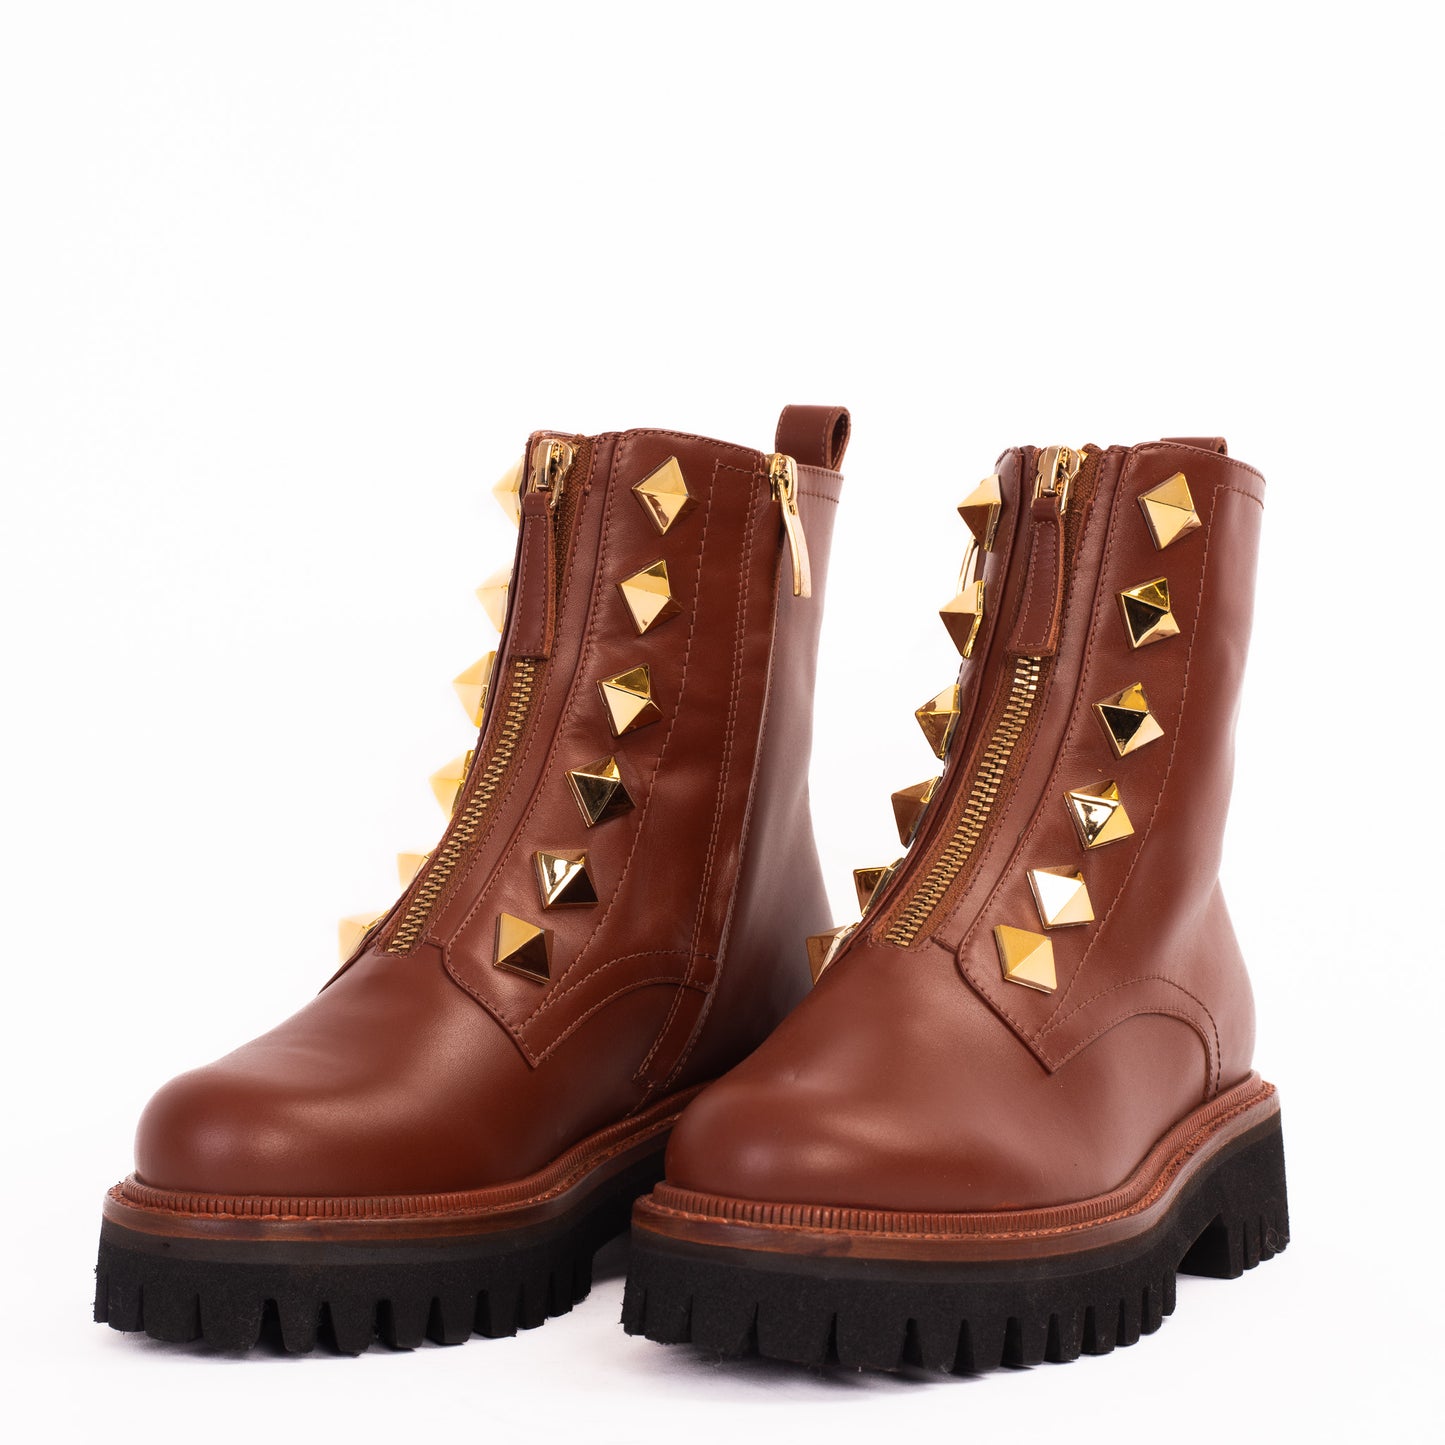 The Ottawa Brown Leather Ankle Women Boot